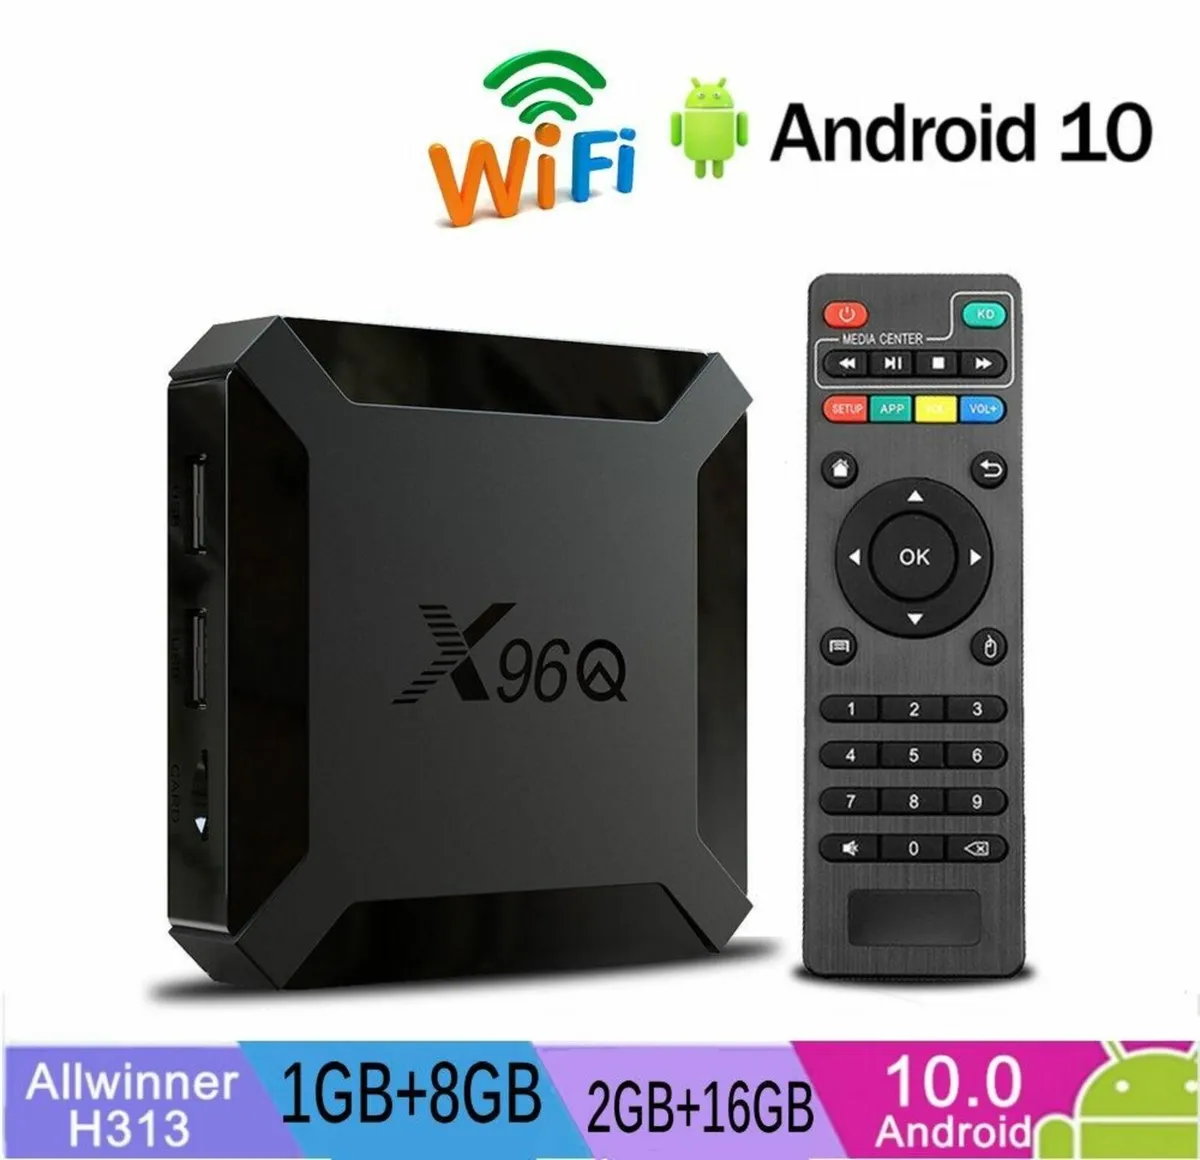 TV Box X96Q Android 10, Wi-Fi